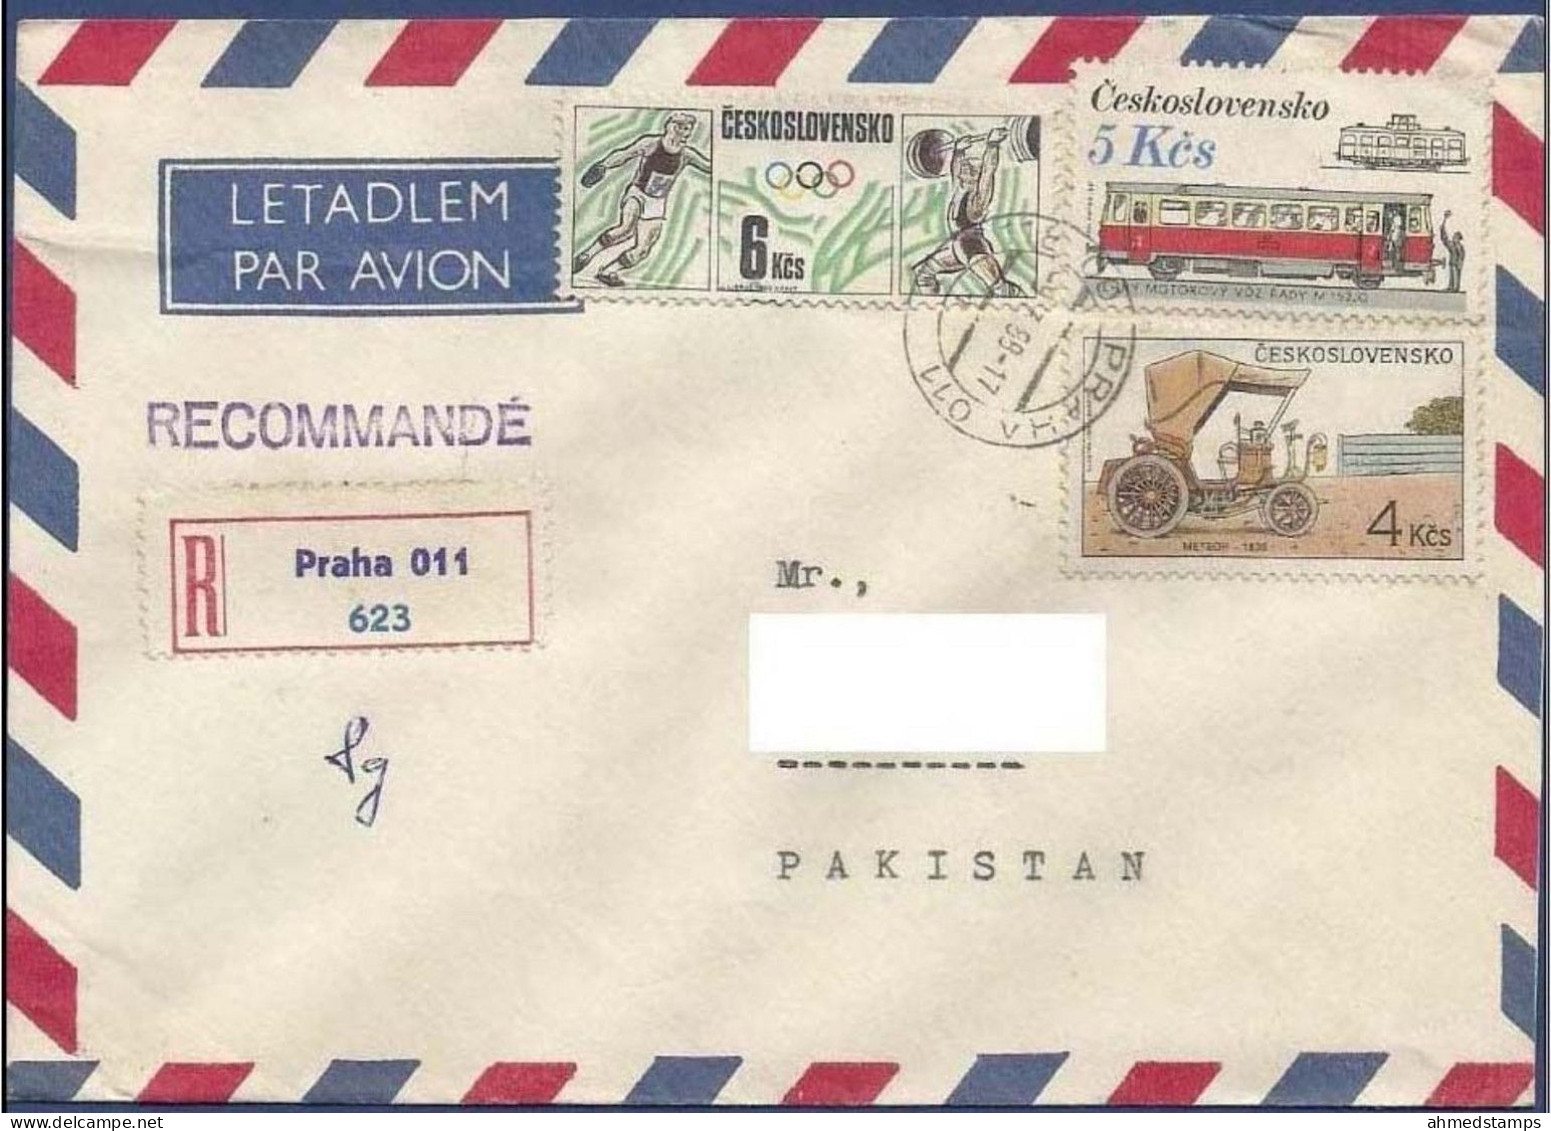 CZECHOSLOVAKIA REGISTERED 1988  POSTAL USED AIRMAIL COVER TO PAKISTAN - Luftpost